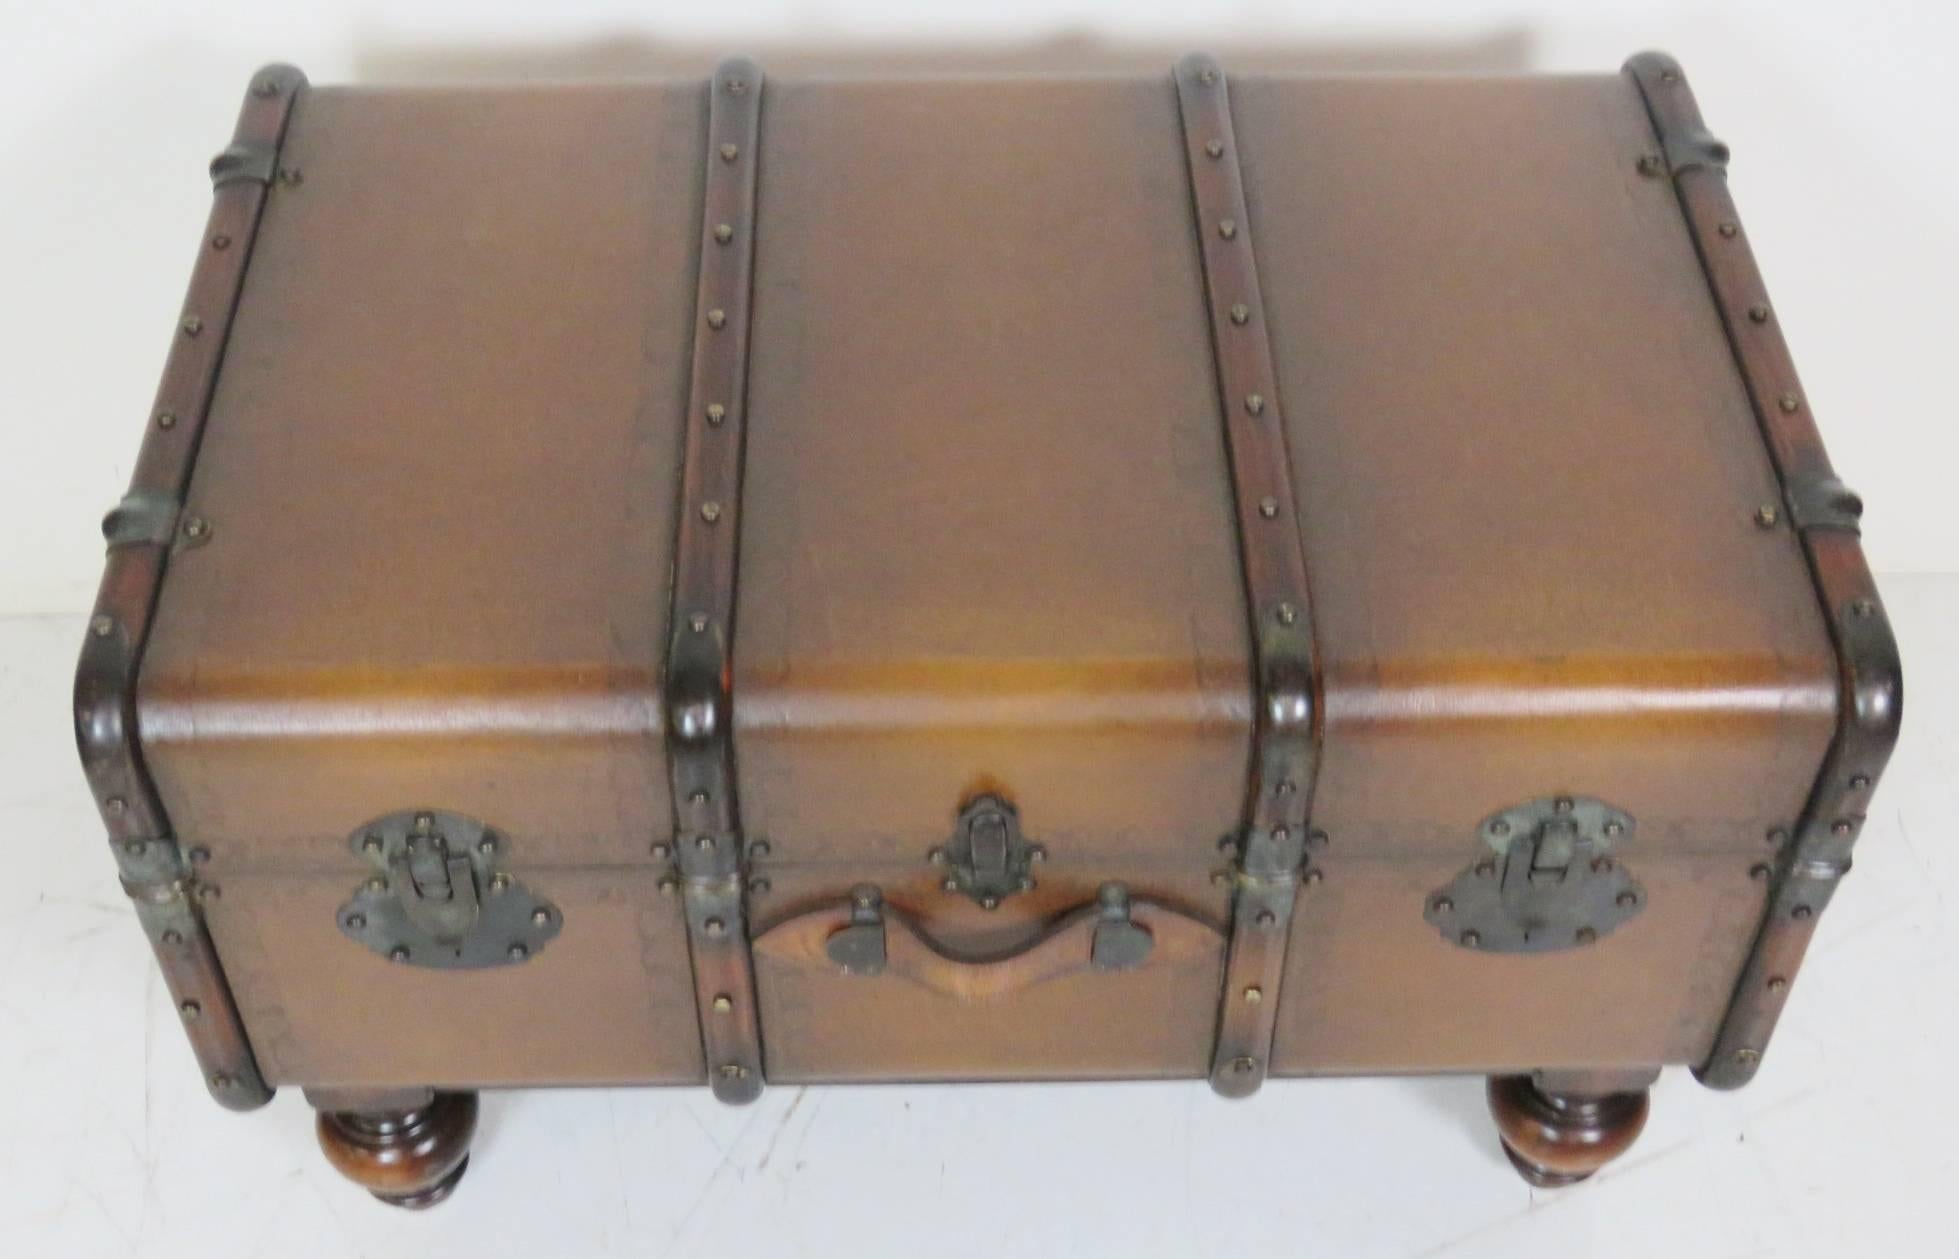 Leather trunk with metal hardware.